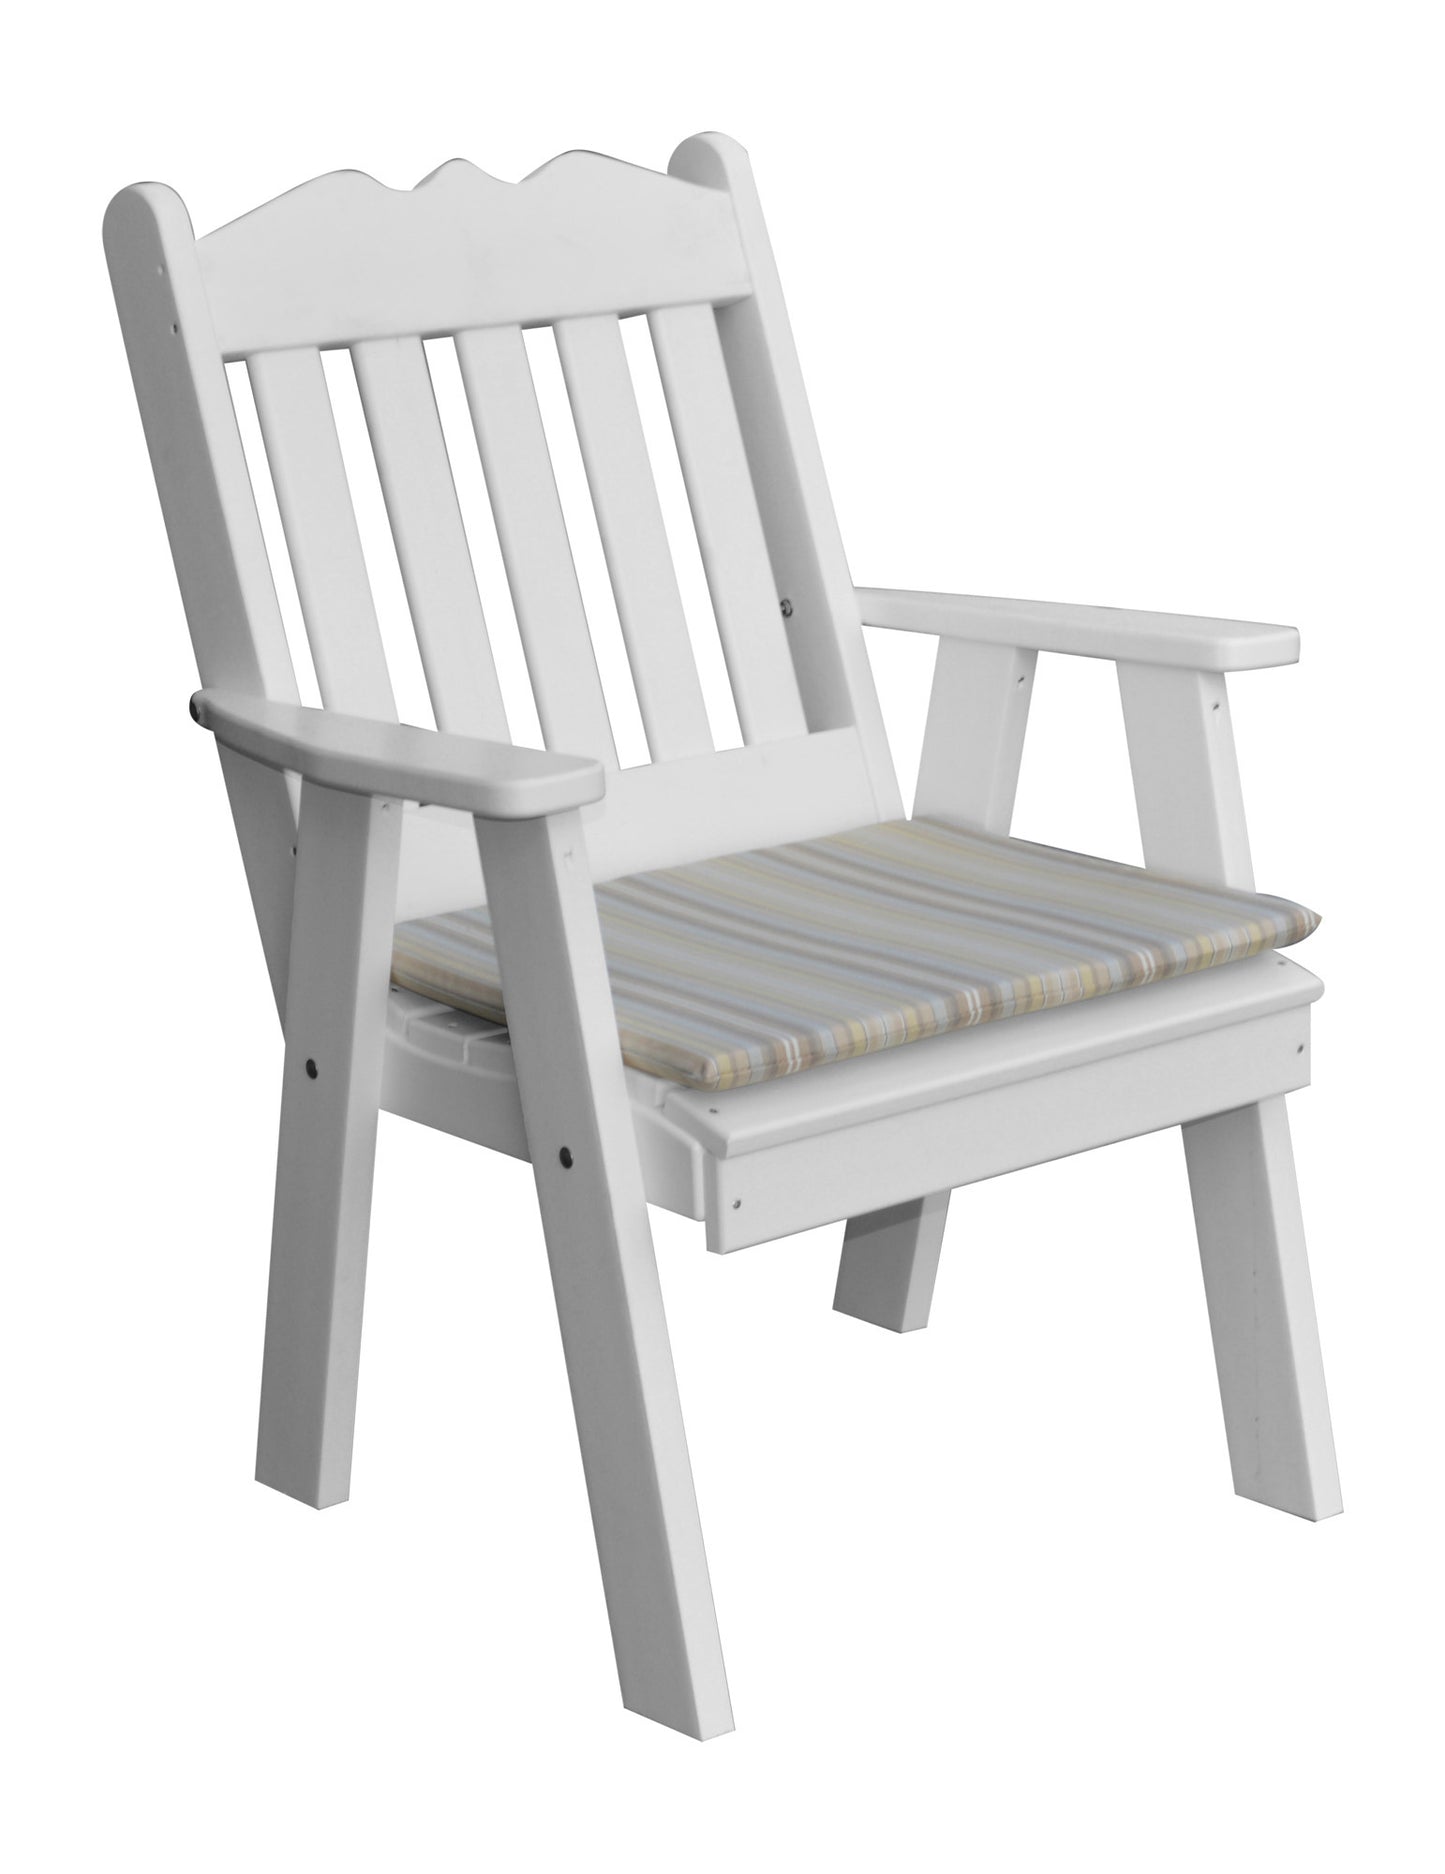 A&L Furniture Company Recycled Plastic Royal English Deck Chair - LEAD TIME TO SHIP 10 BUSINESS DAYS